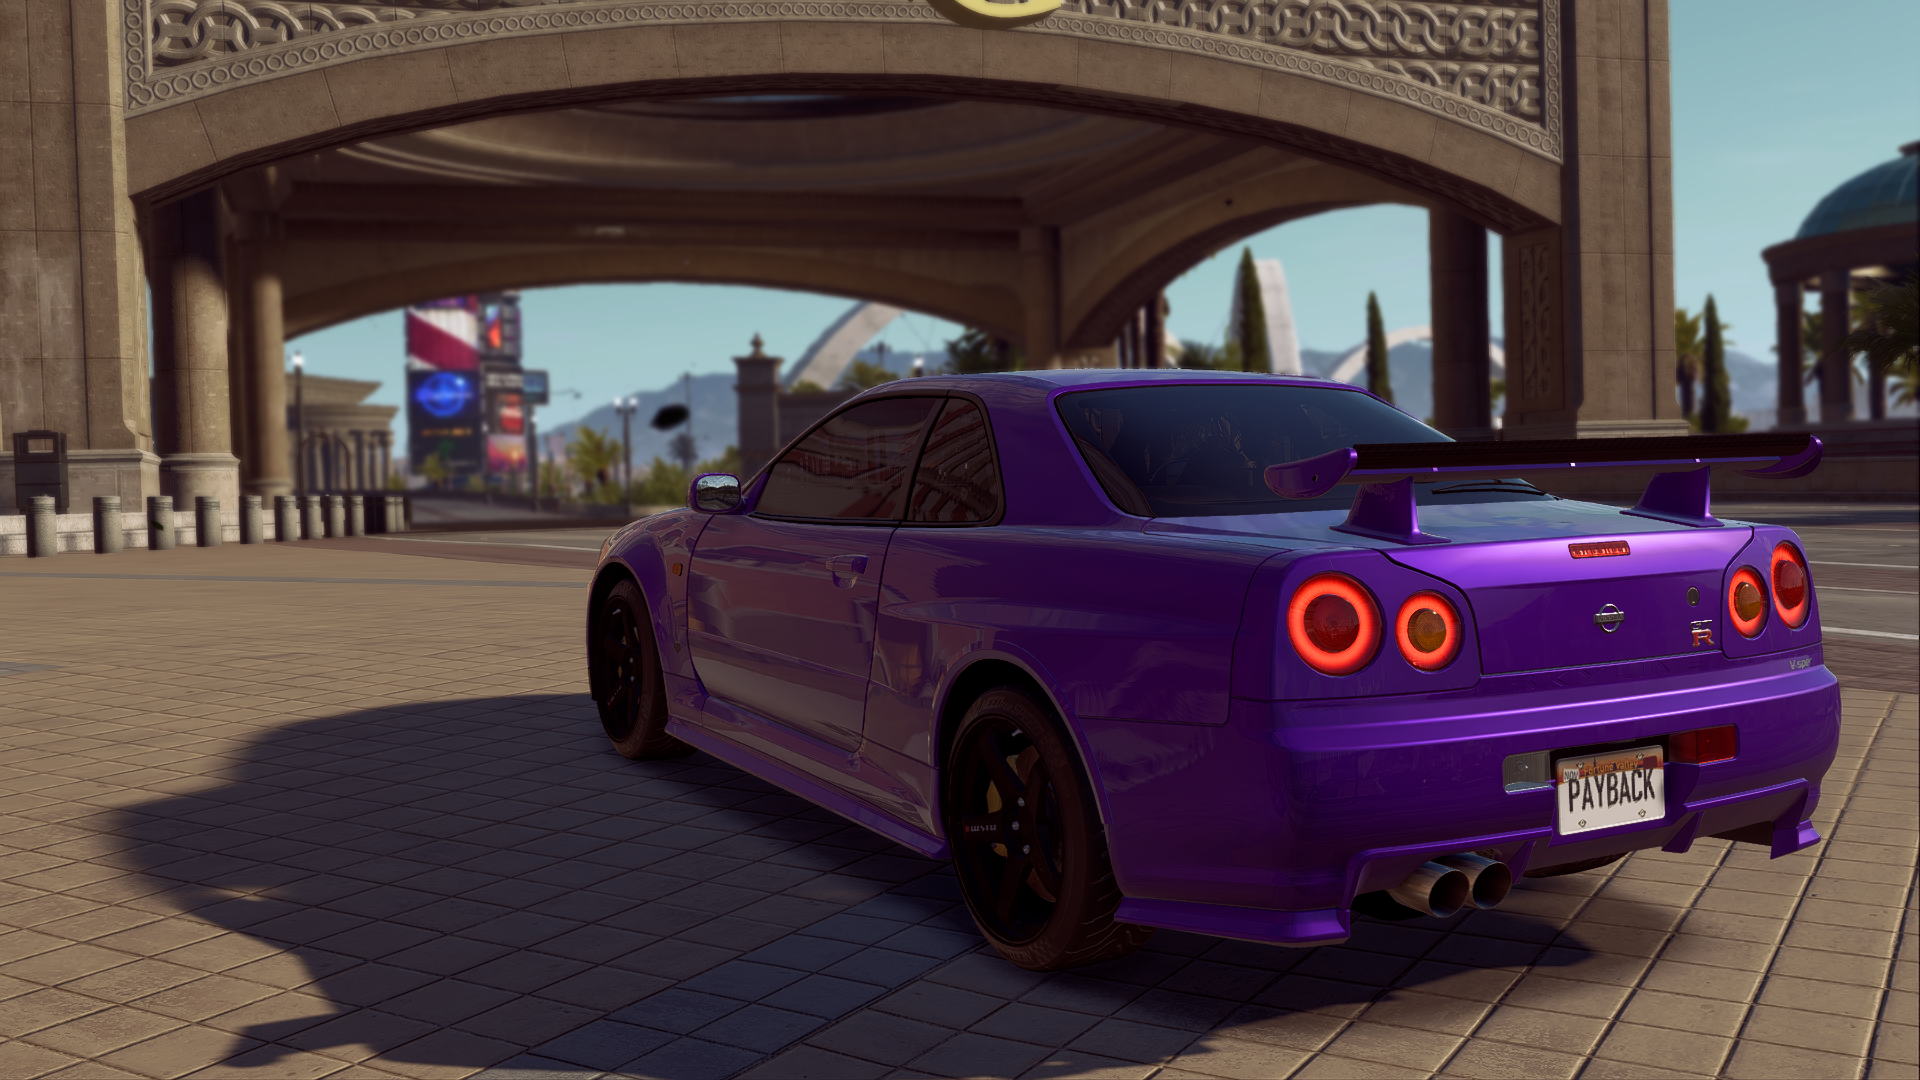 General 1920x1080 Nissan Skyline R34 Need for Speed Payback Nissan car vehicle purple cars screen shot video games Nissan Skyline